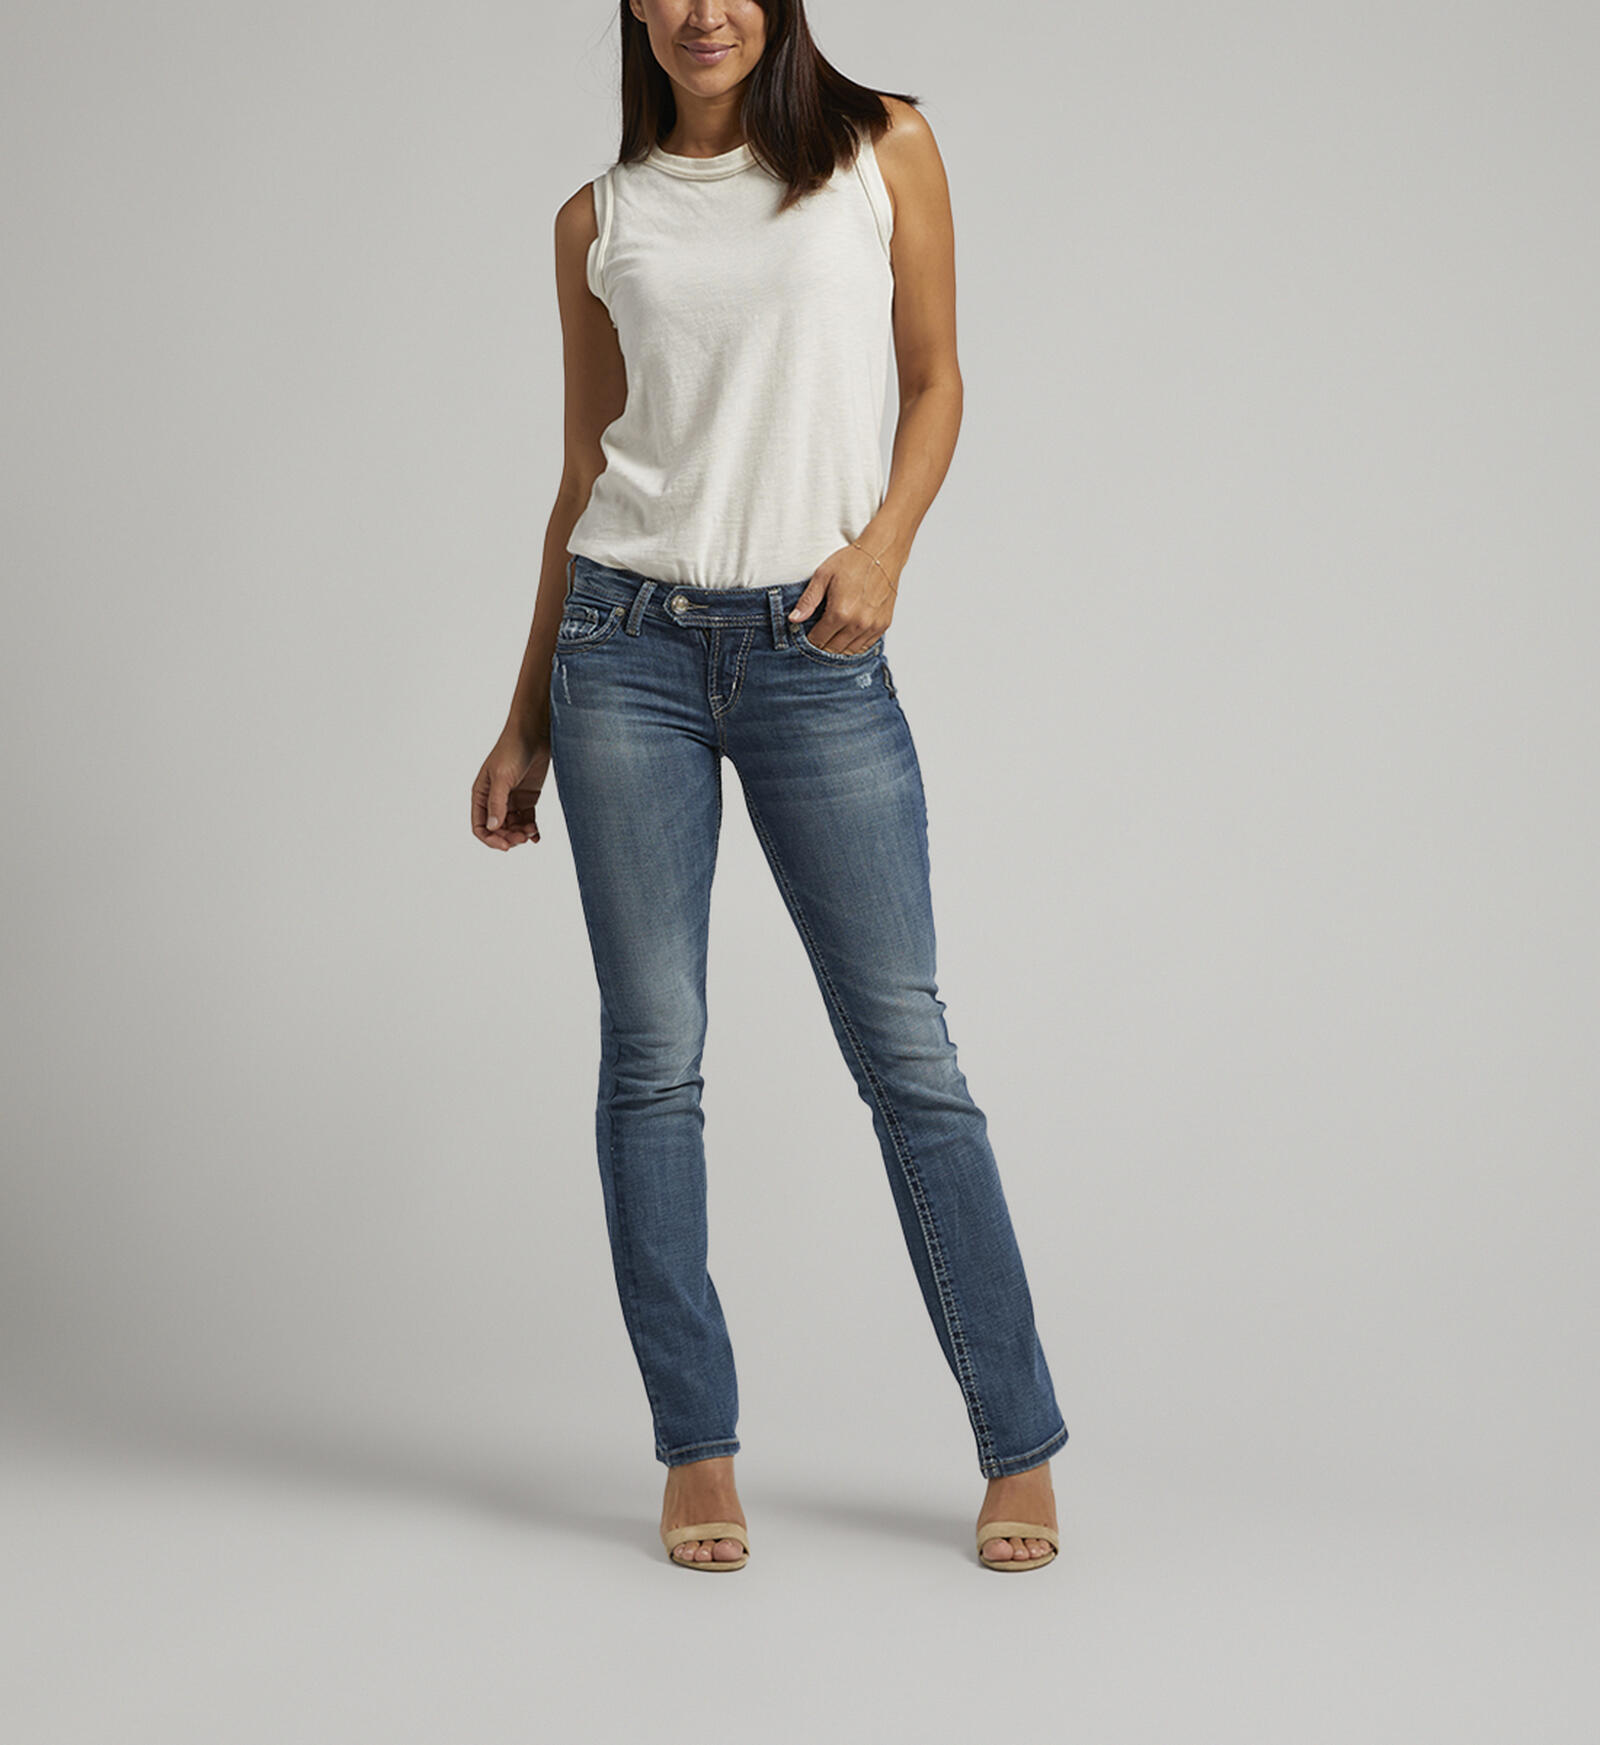 Buy Tuesday Low Rise Slim Bootcut Jeans for 98.00 | Silver Jeans US New